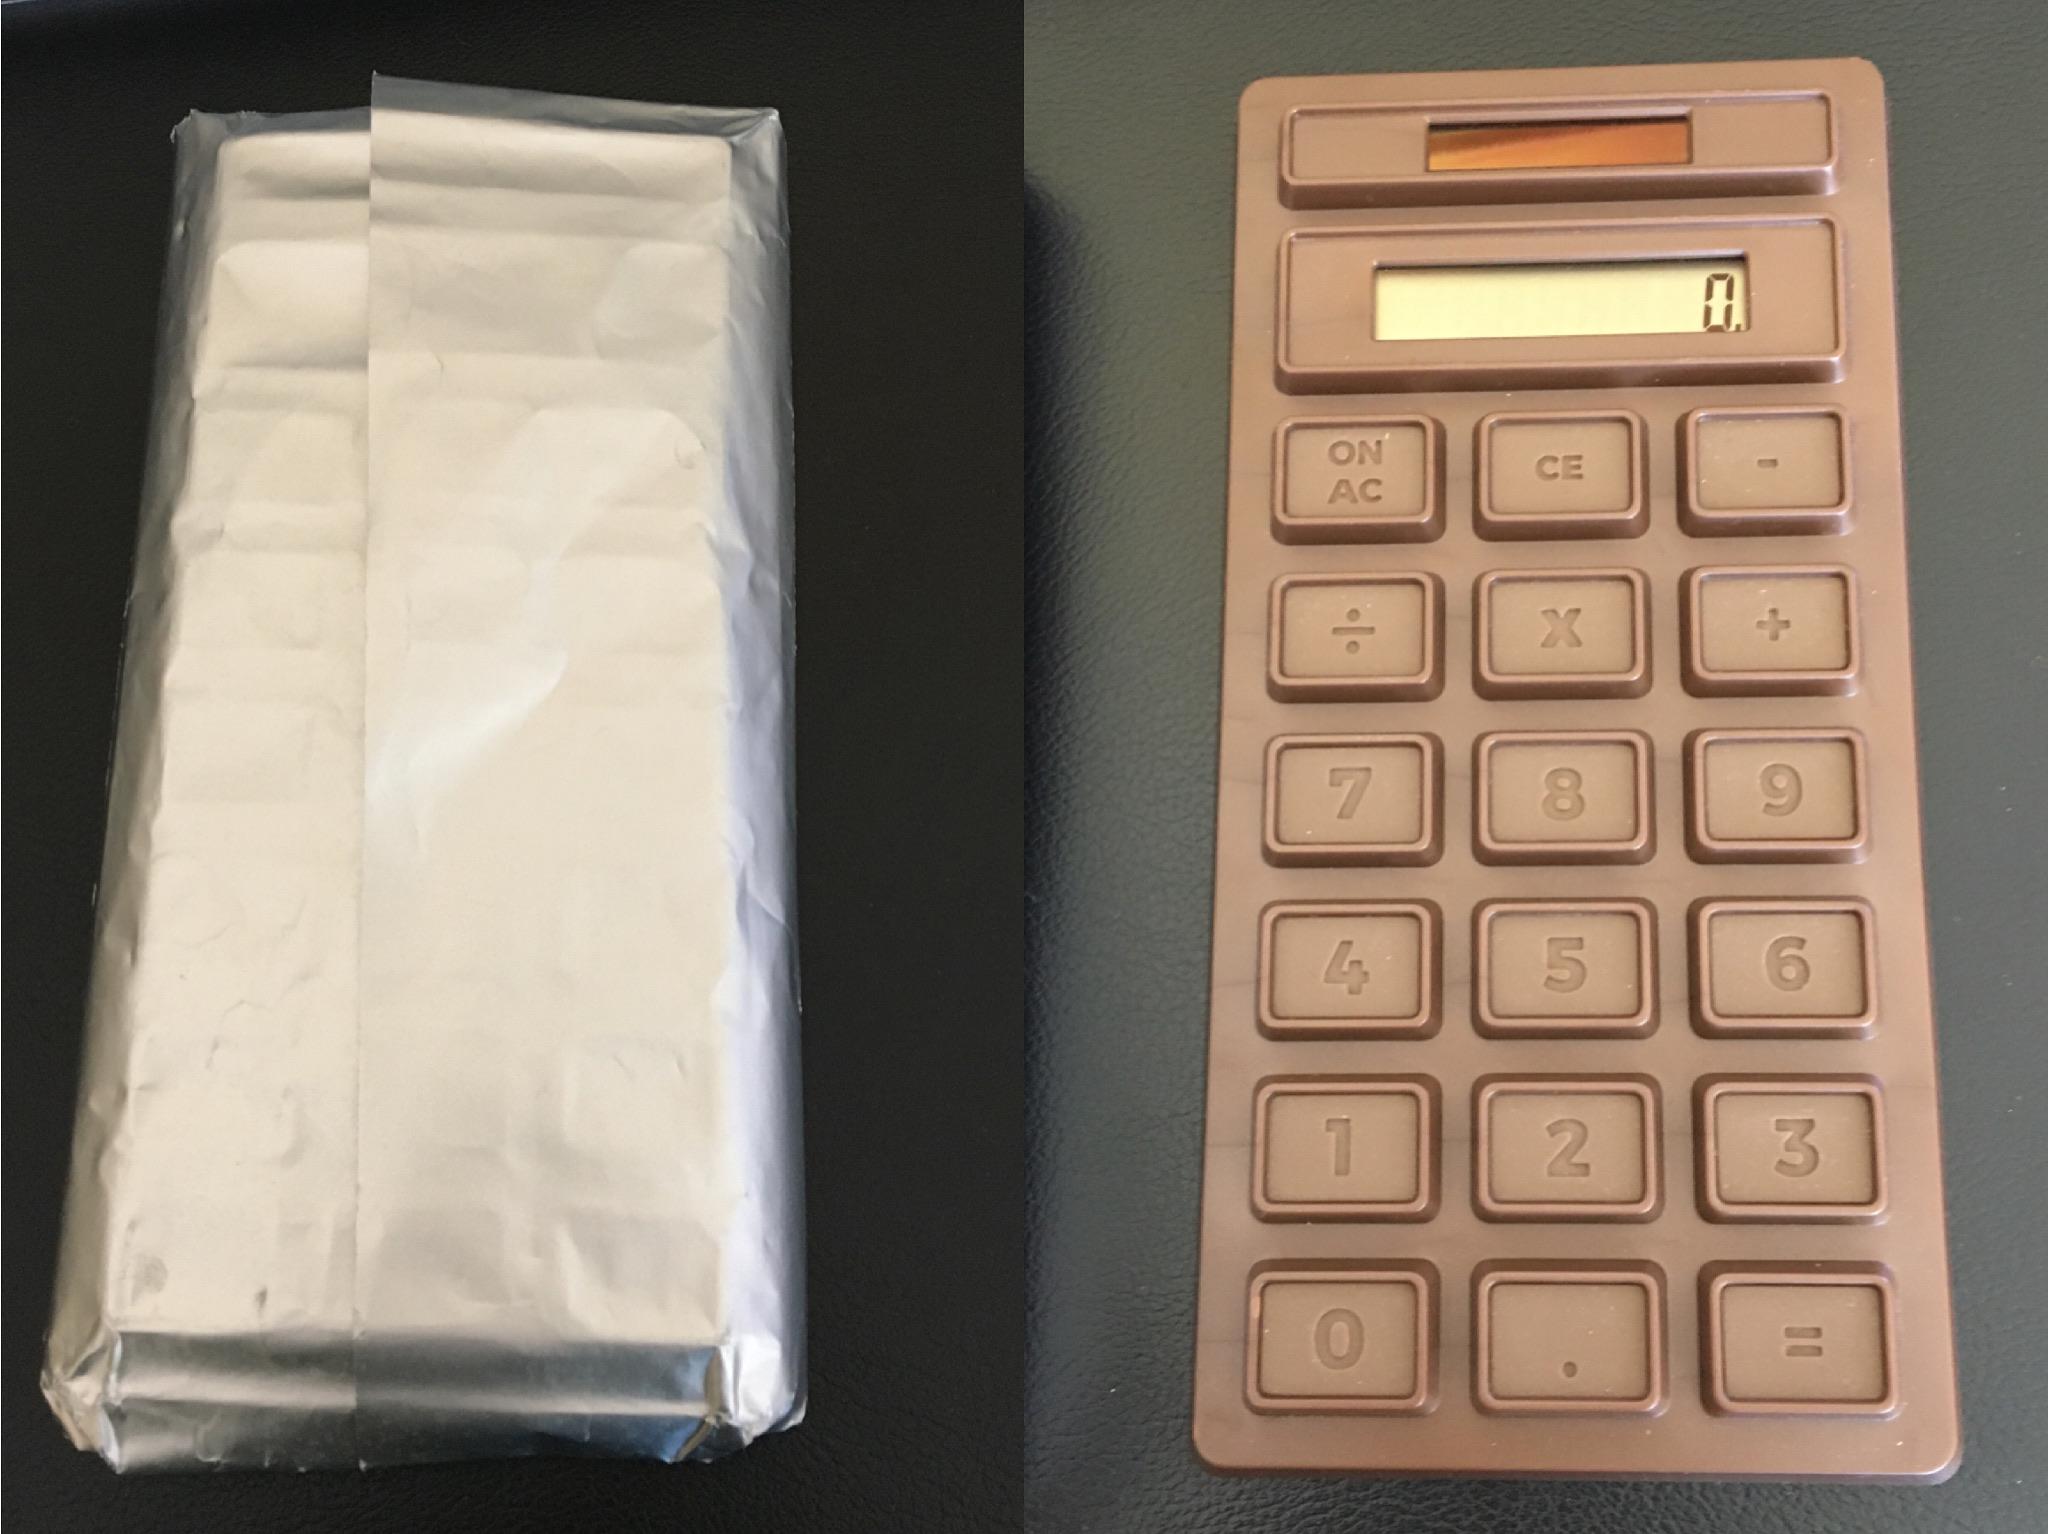 A calculator that looks like chocolate, smells like chocolate, and comes in a wrapper, too.